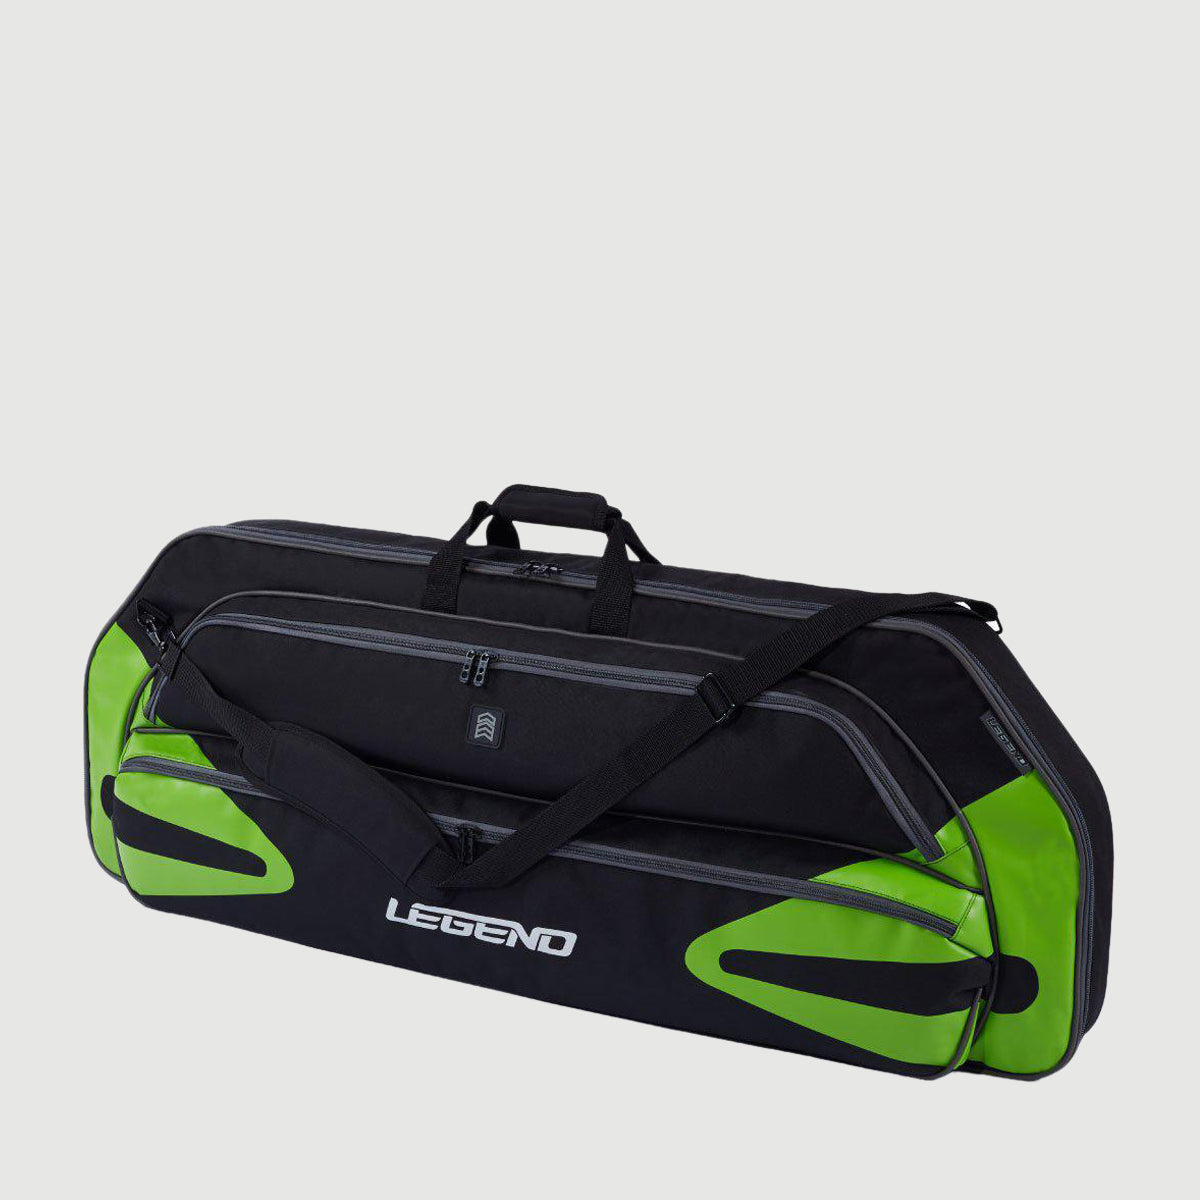 Protect your bow with the Premium Quality Black/Green Monstro Bow Case - Legend Archery